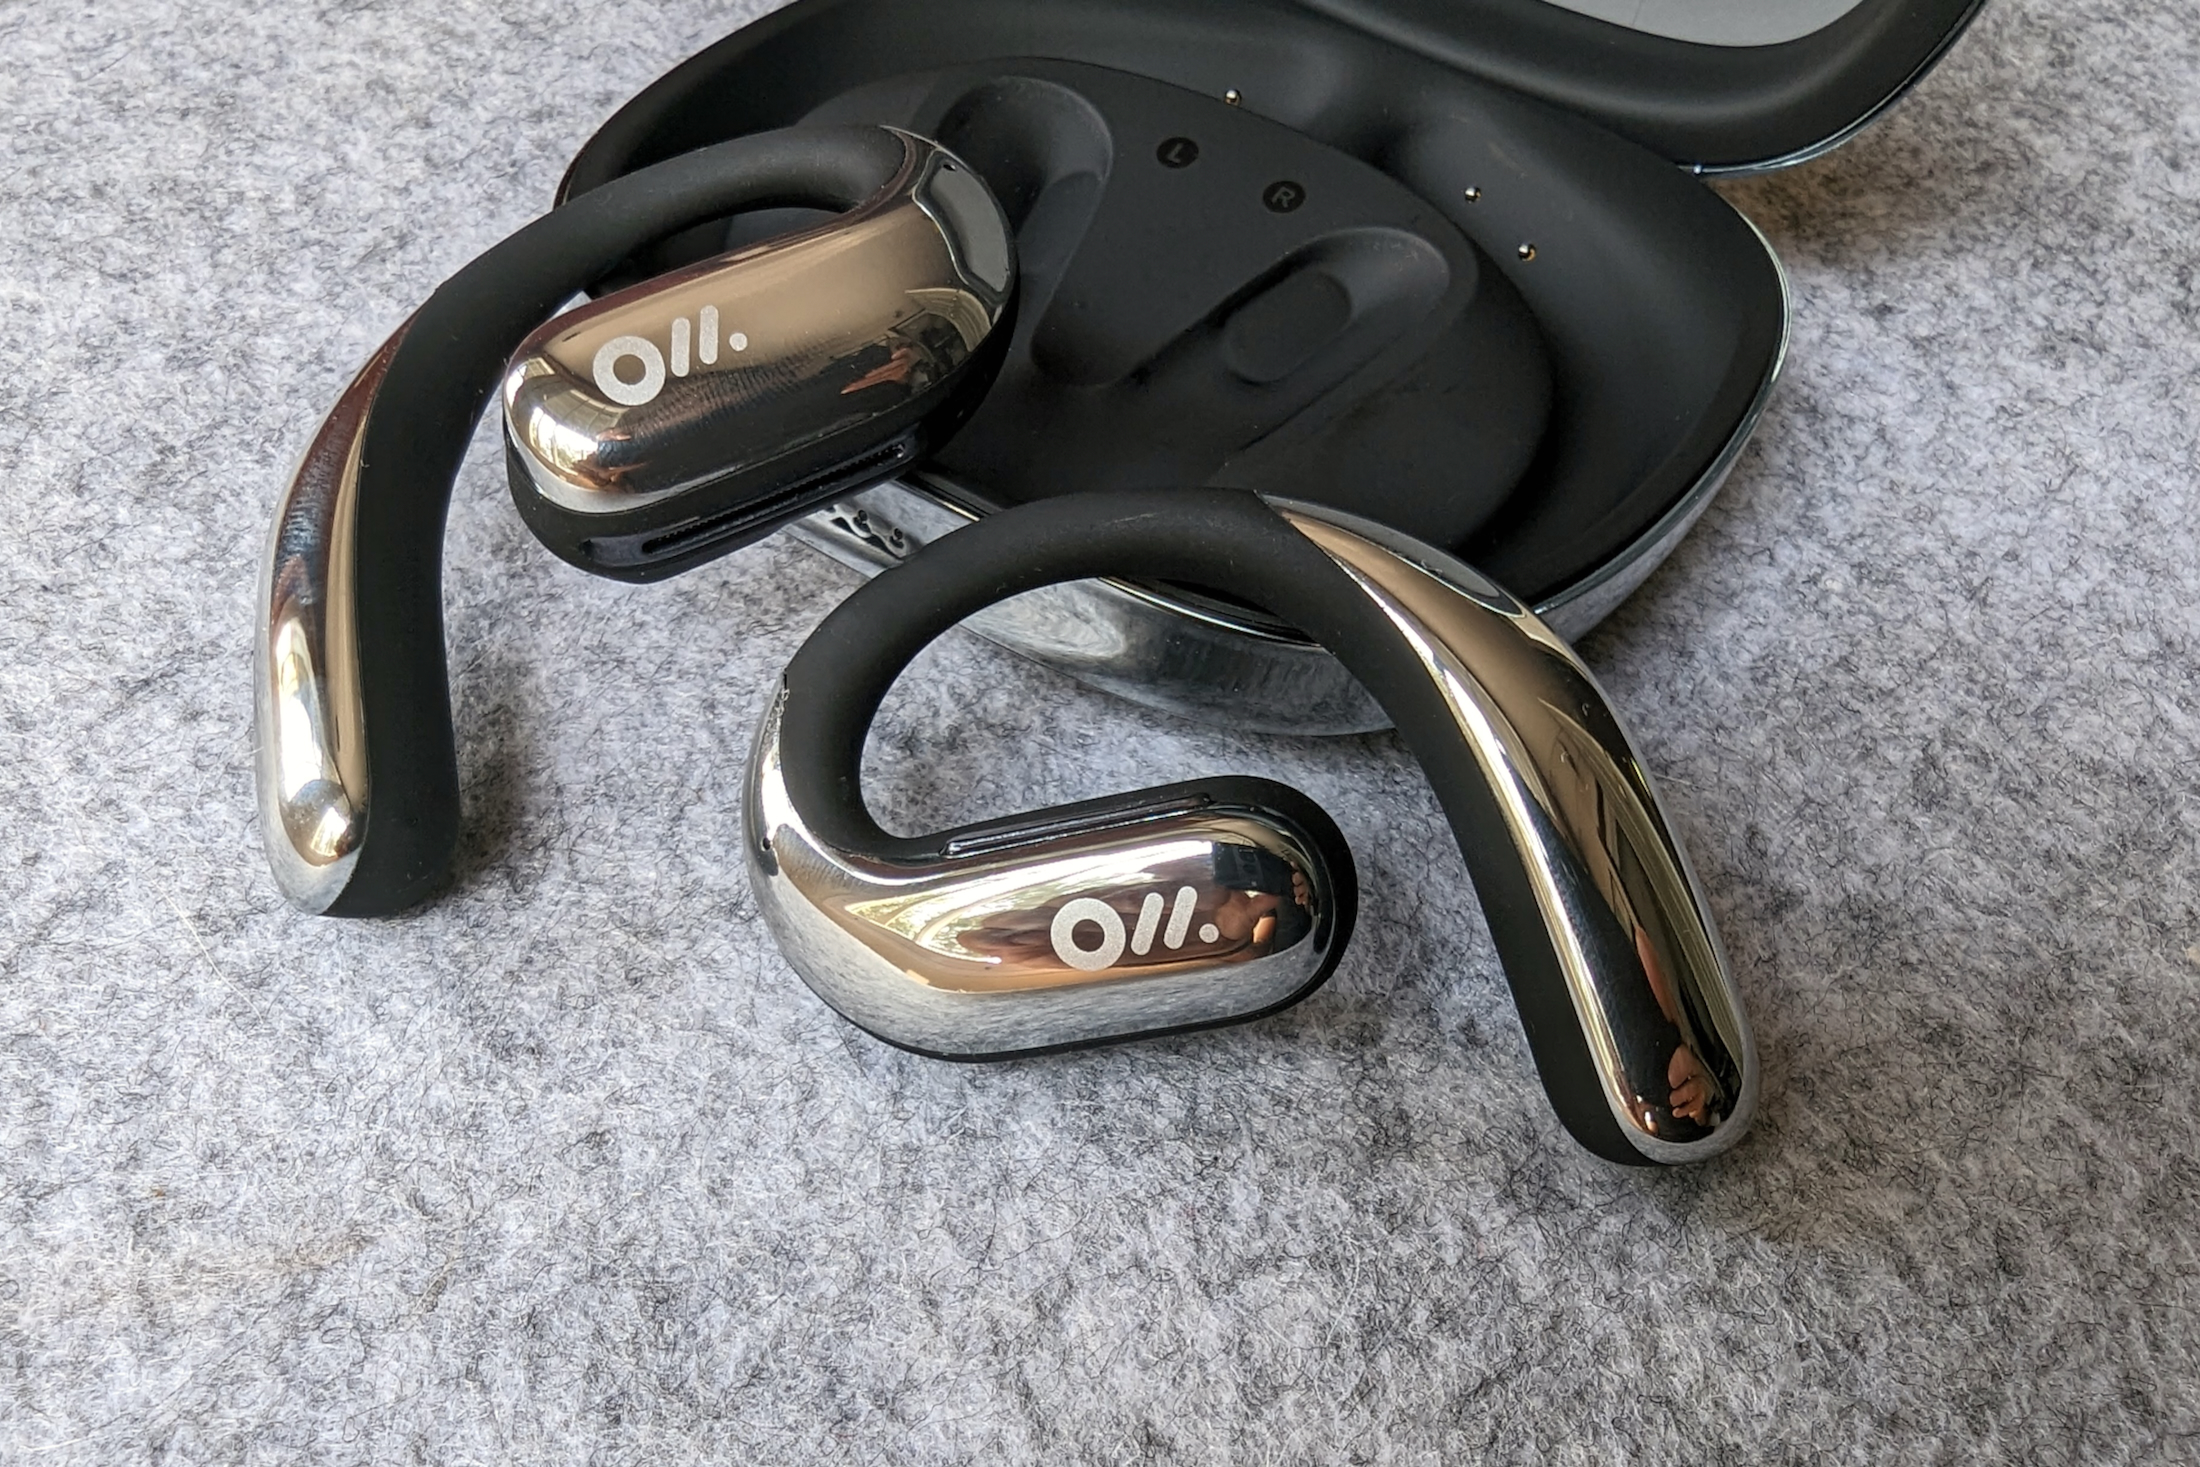 Oladance OWS Pro review: the future is wide open | Digital Trends